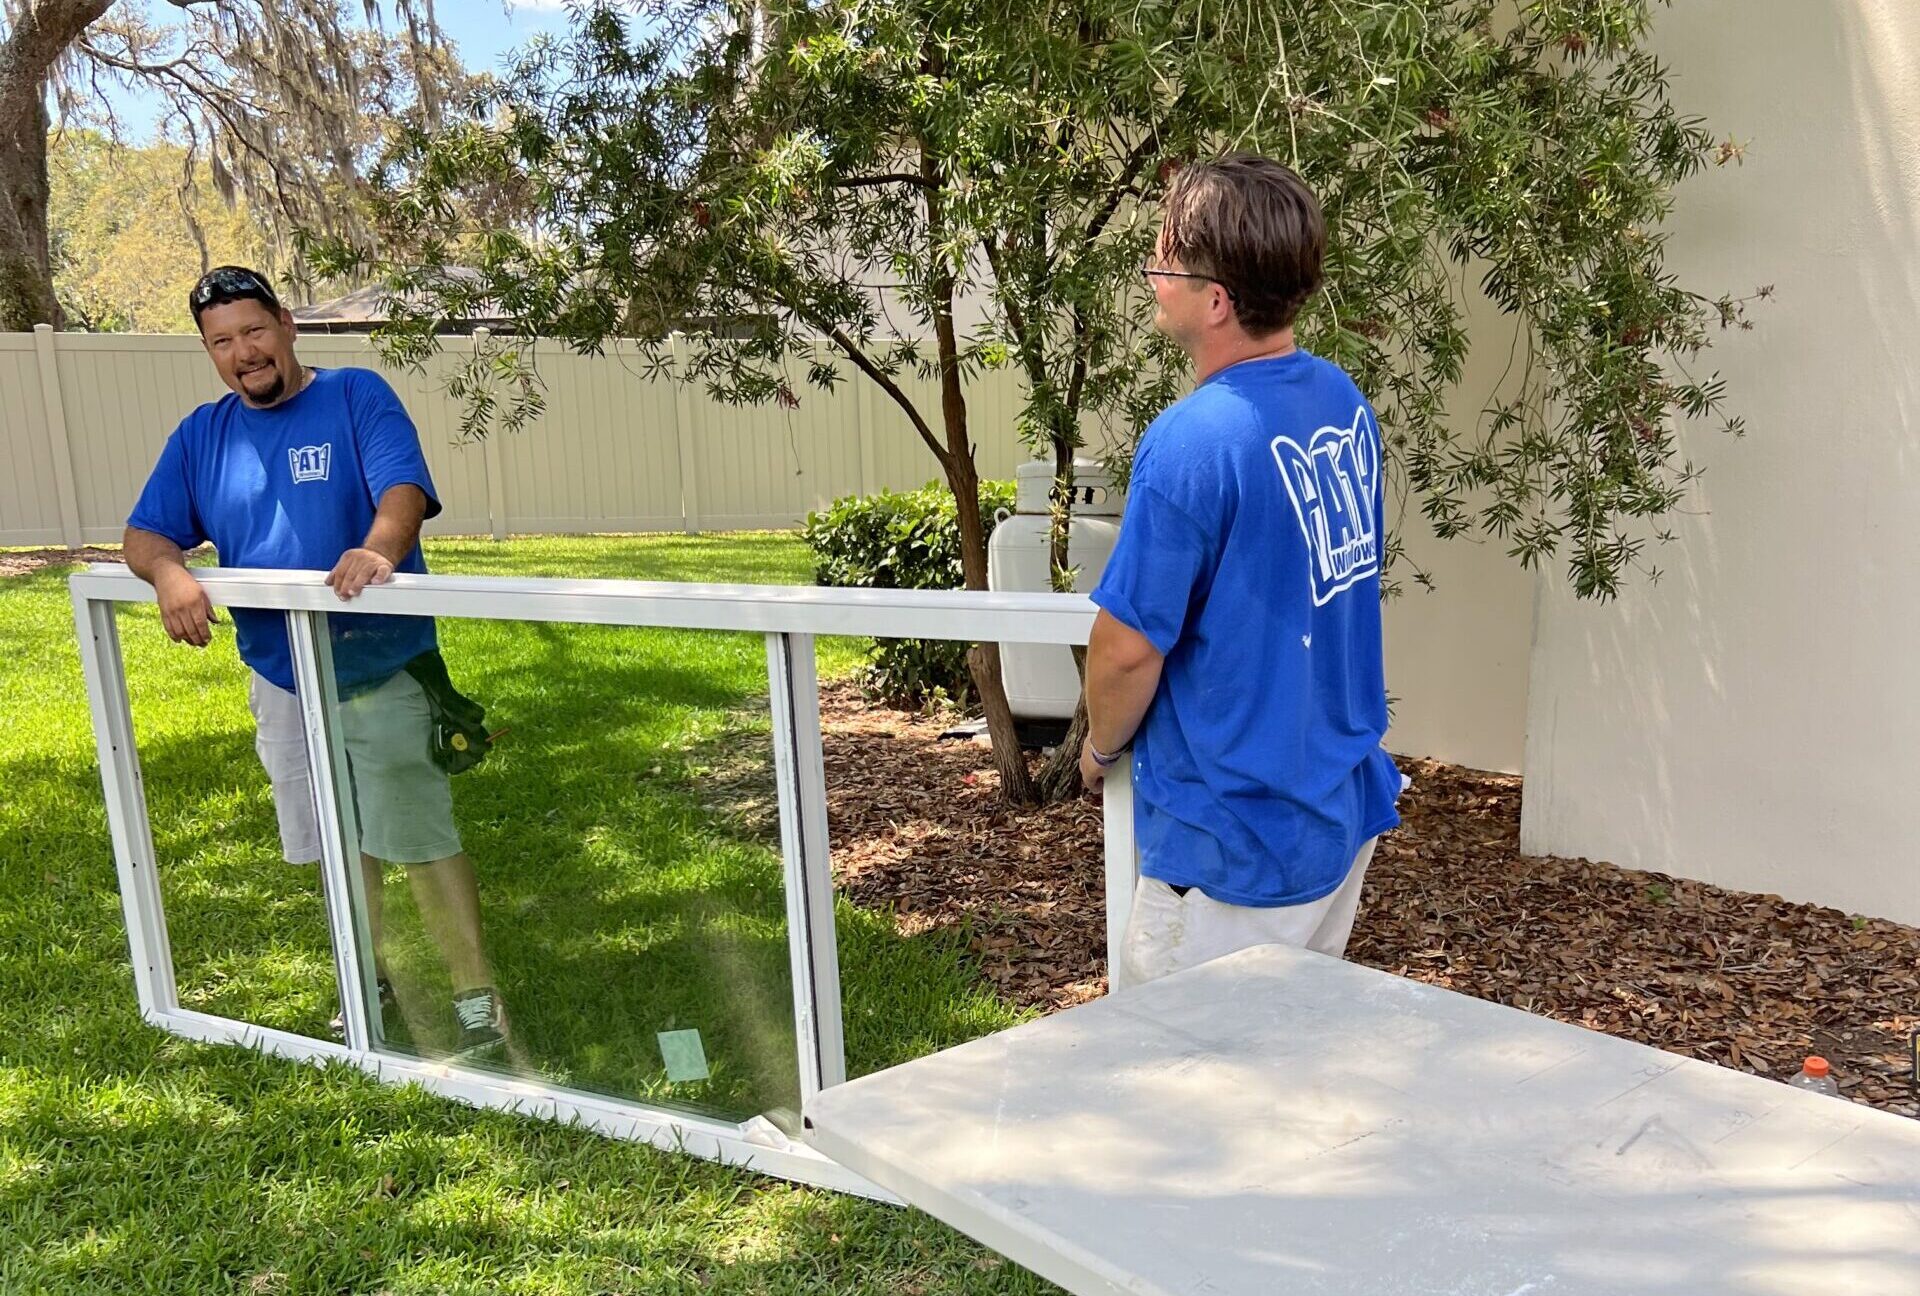 A1 Windows & Doors installers carrying a large window for installation